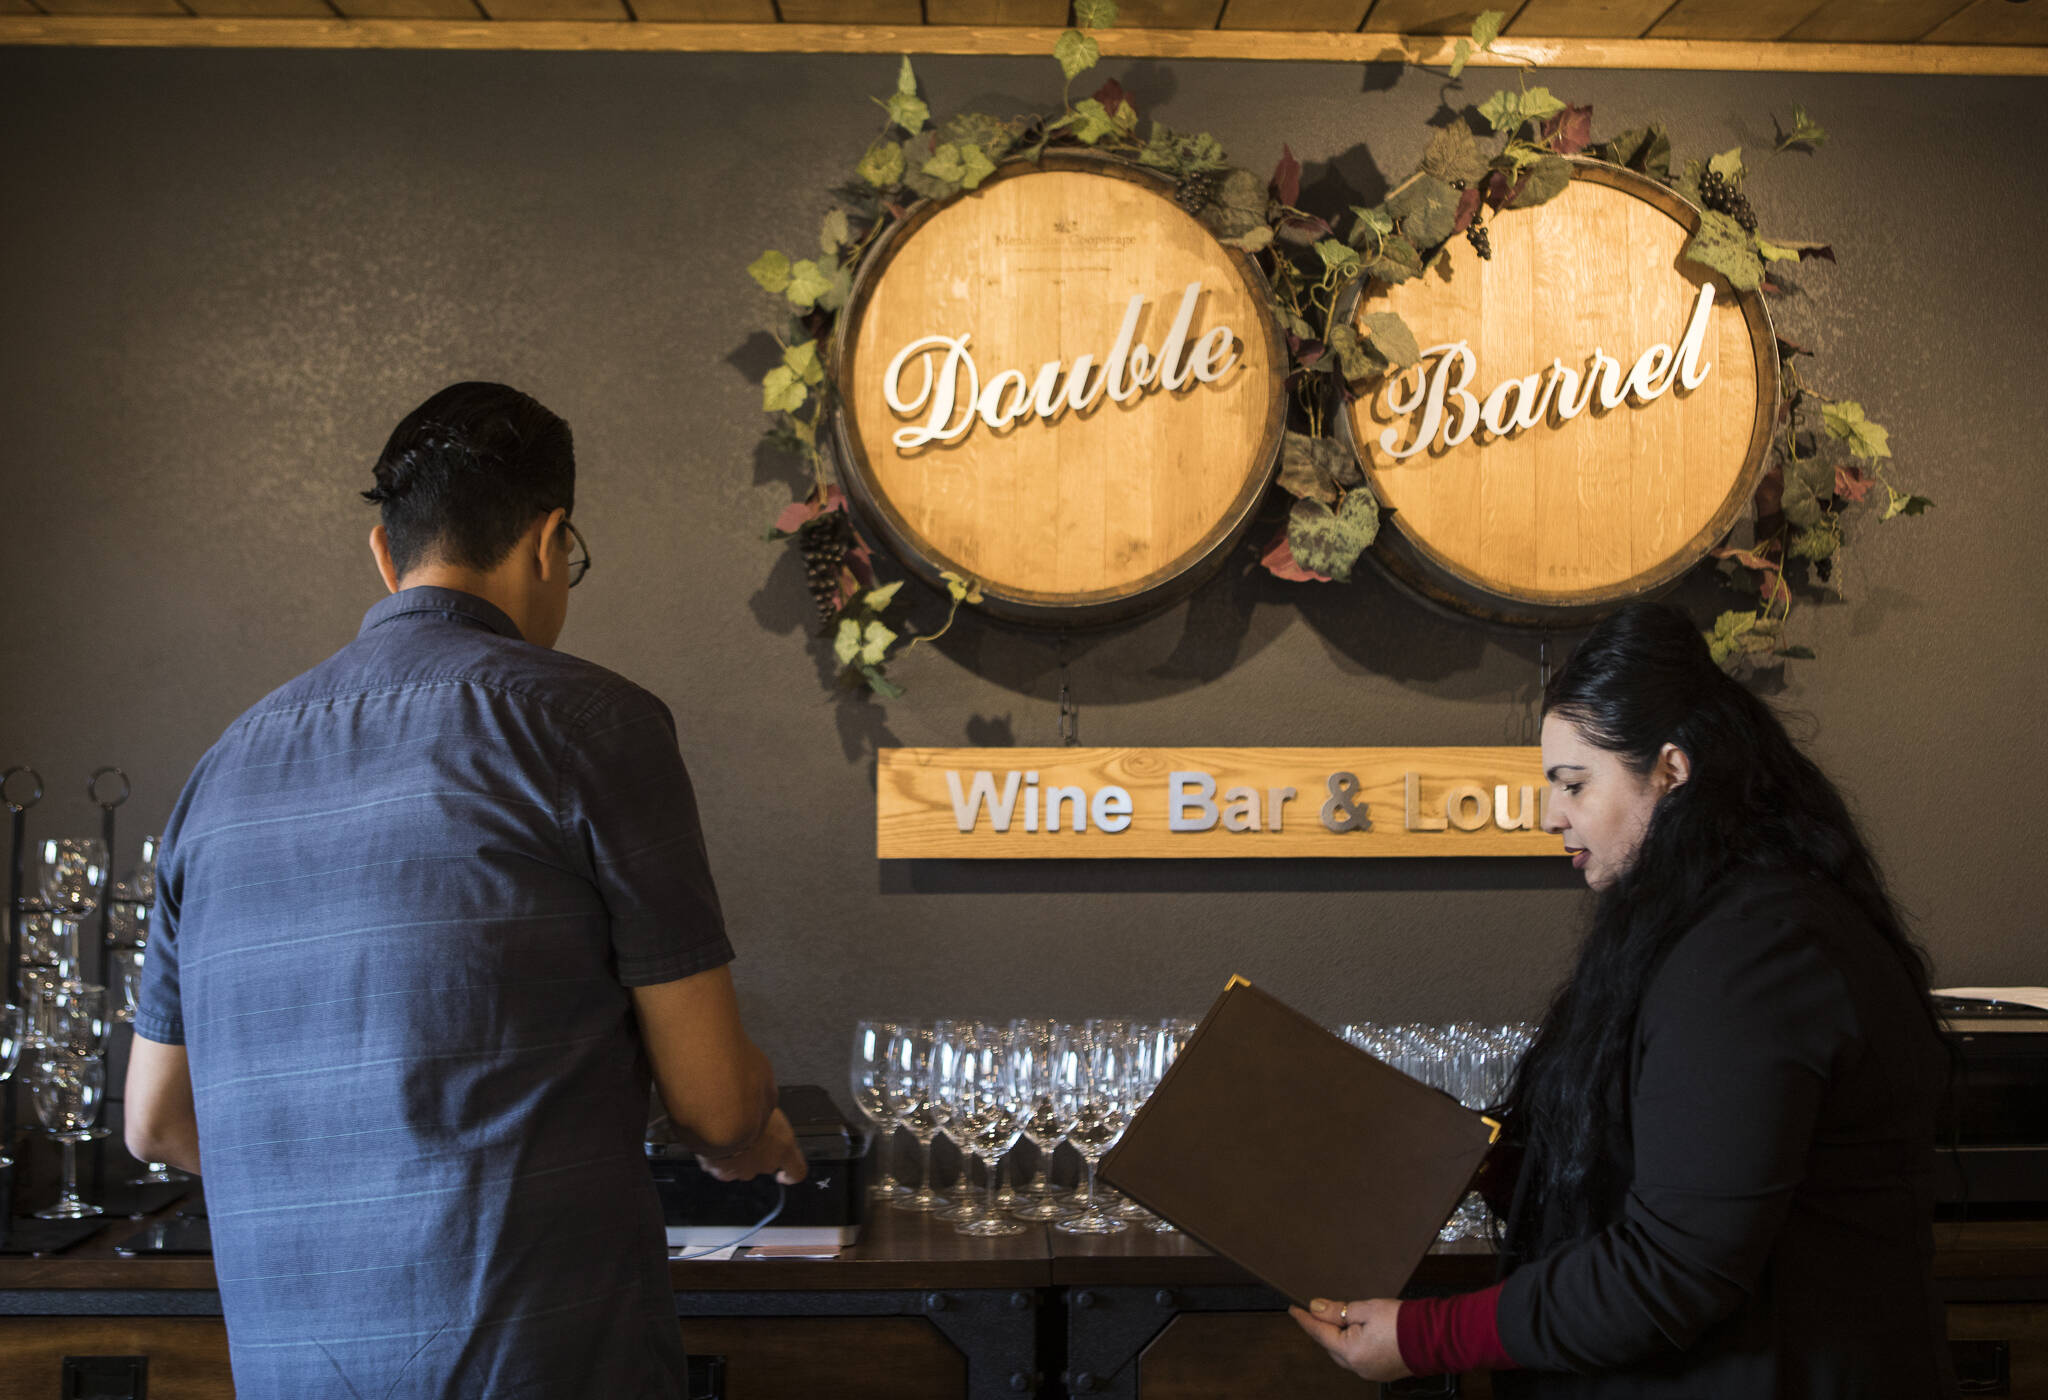 Double Barrel Wine Bar and Lounge owner Lionel Madriz and his wife, Ana Madriz, talk through menu items. (Olivia Vanni / The Herald)